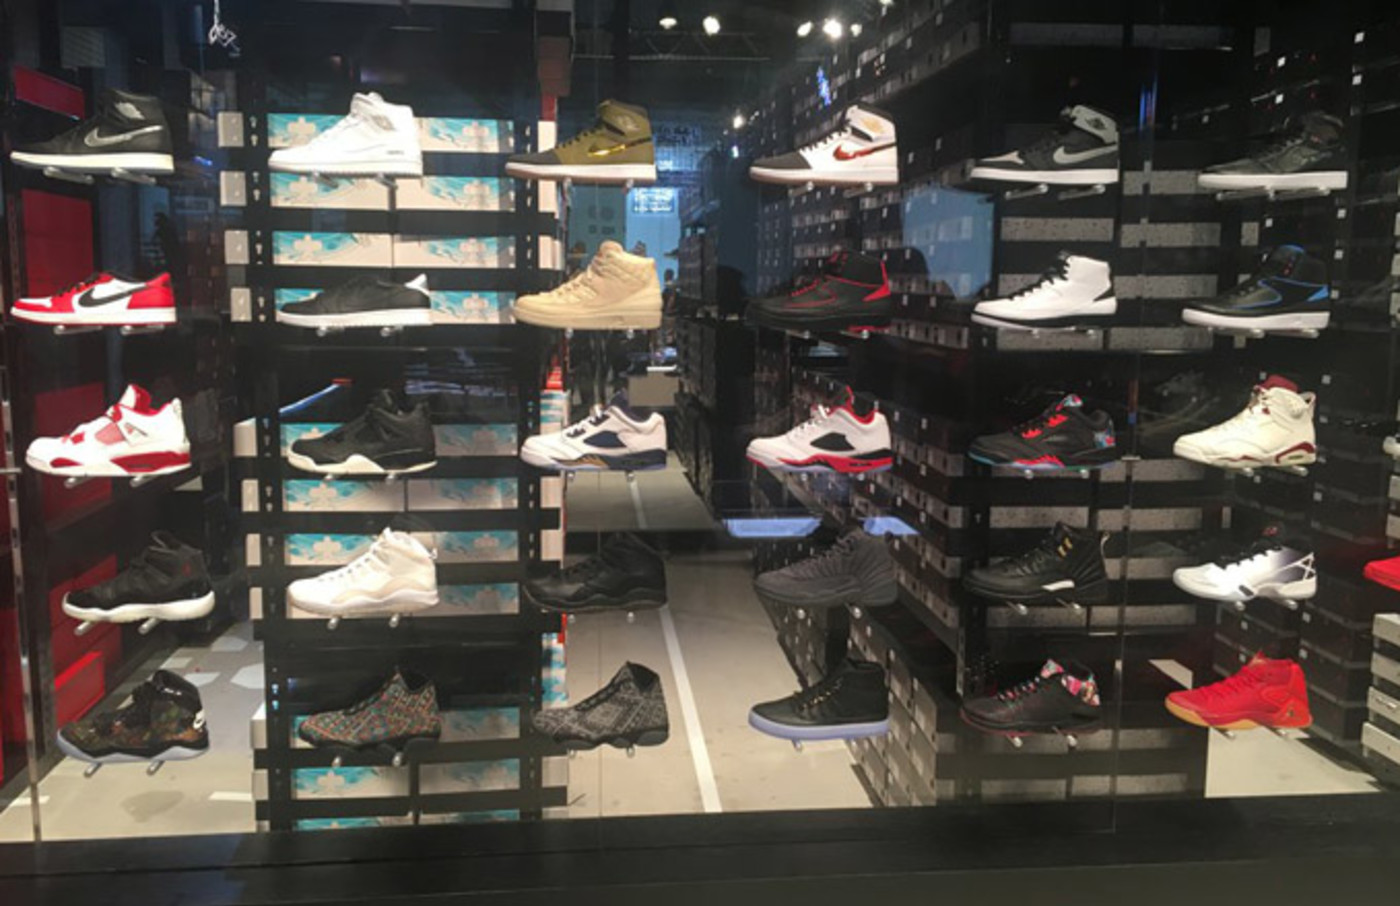 Every Sneaker Available at Jordan Brand 